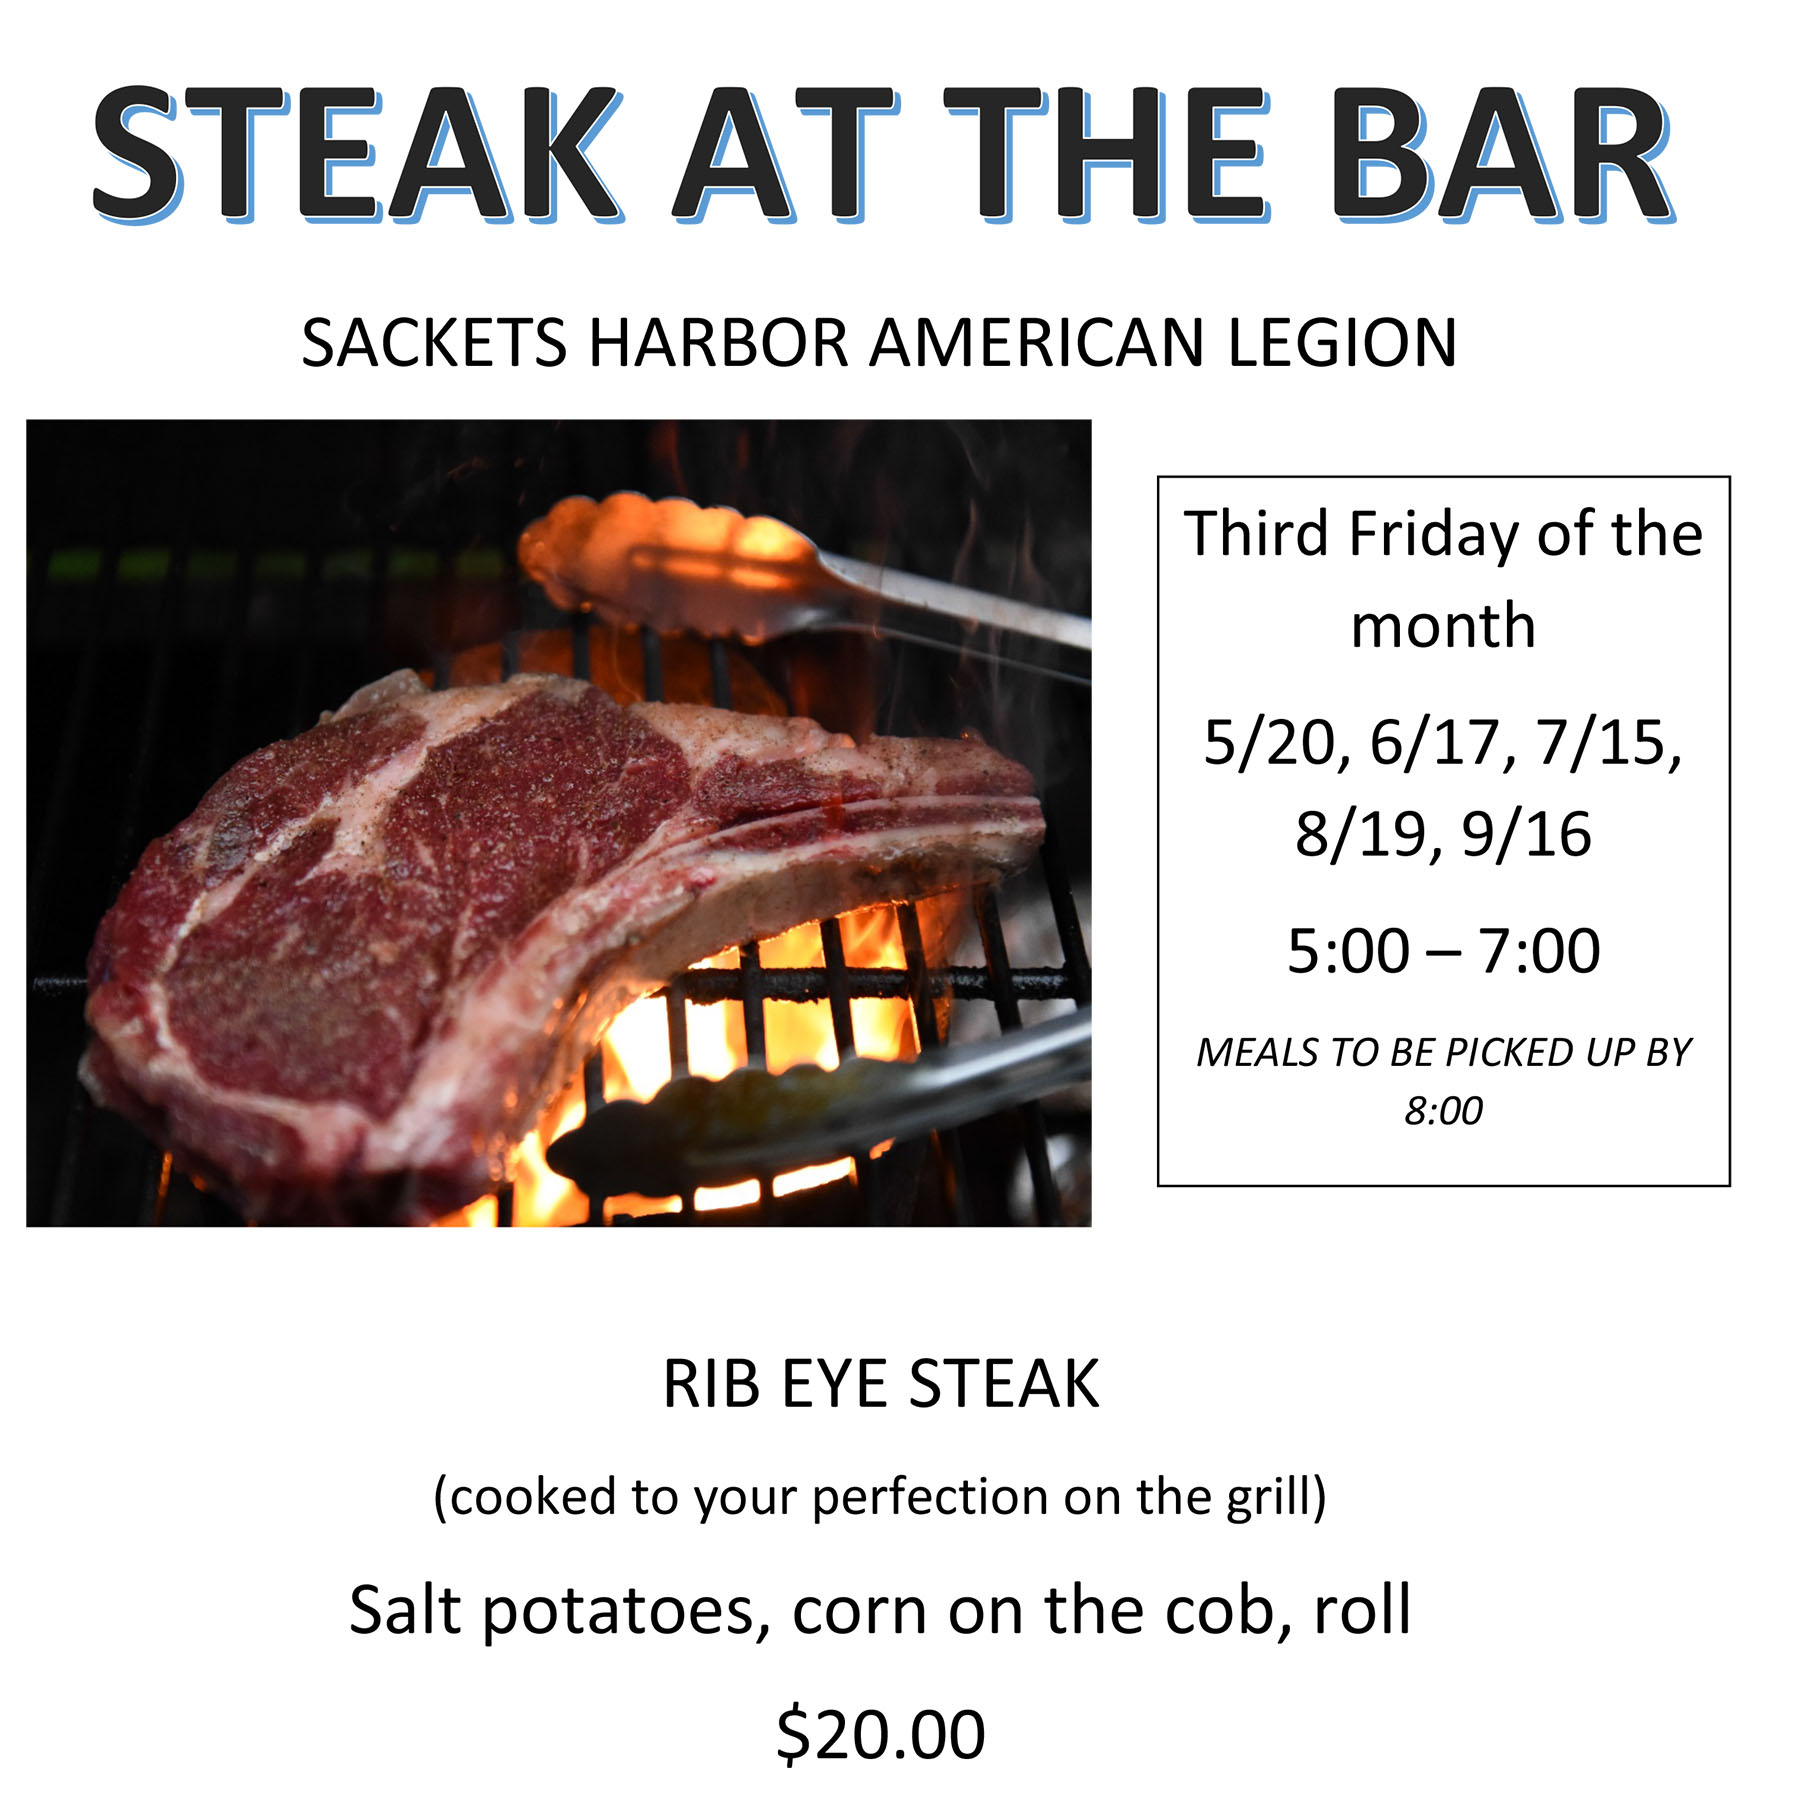 Flyer for the Steak at the Bar event at the Sackets Harbor American Legion